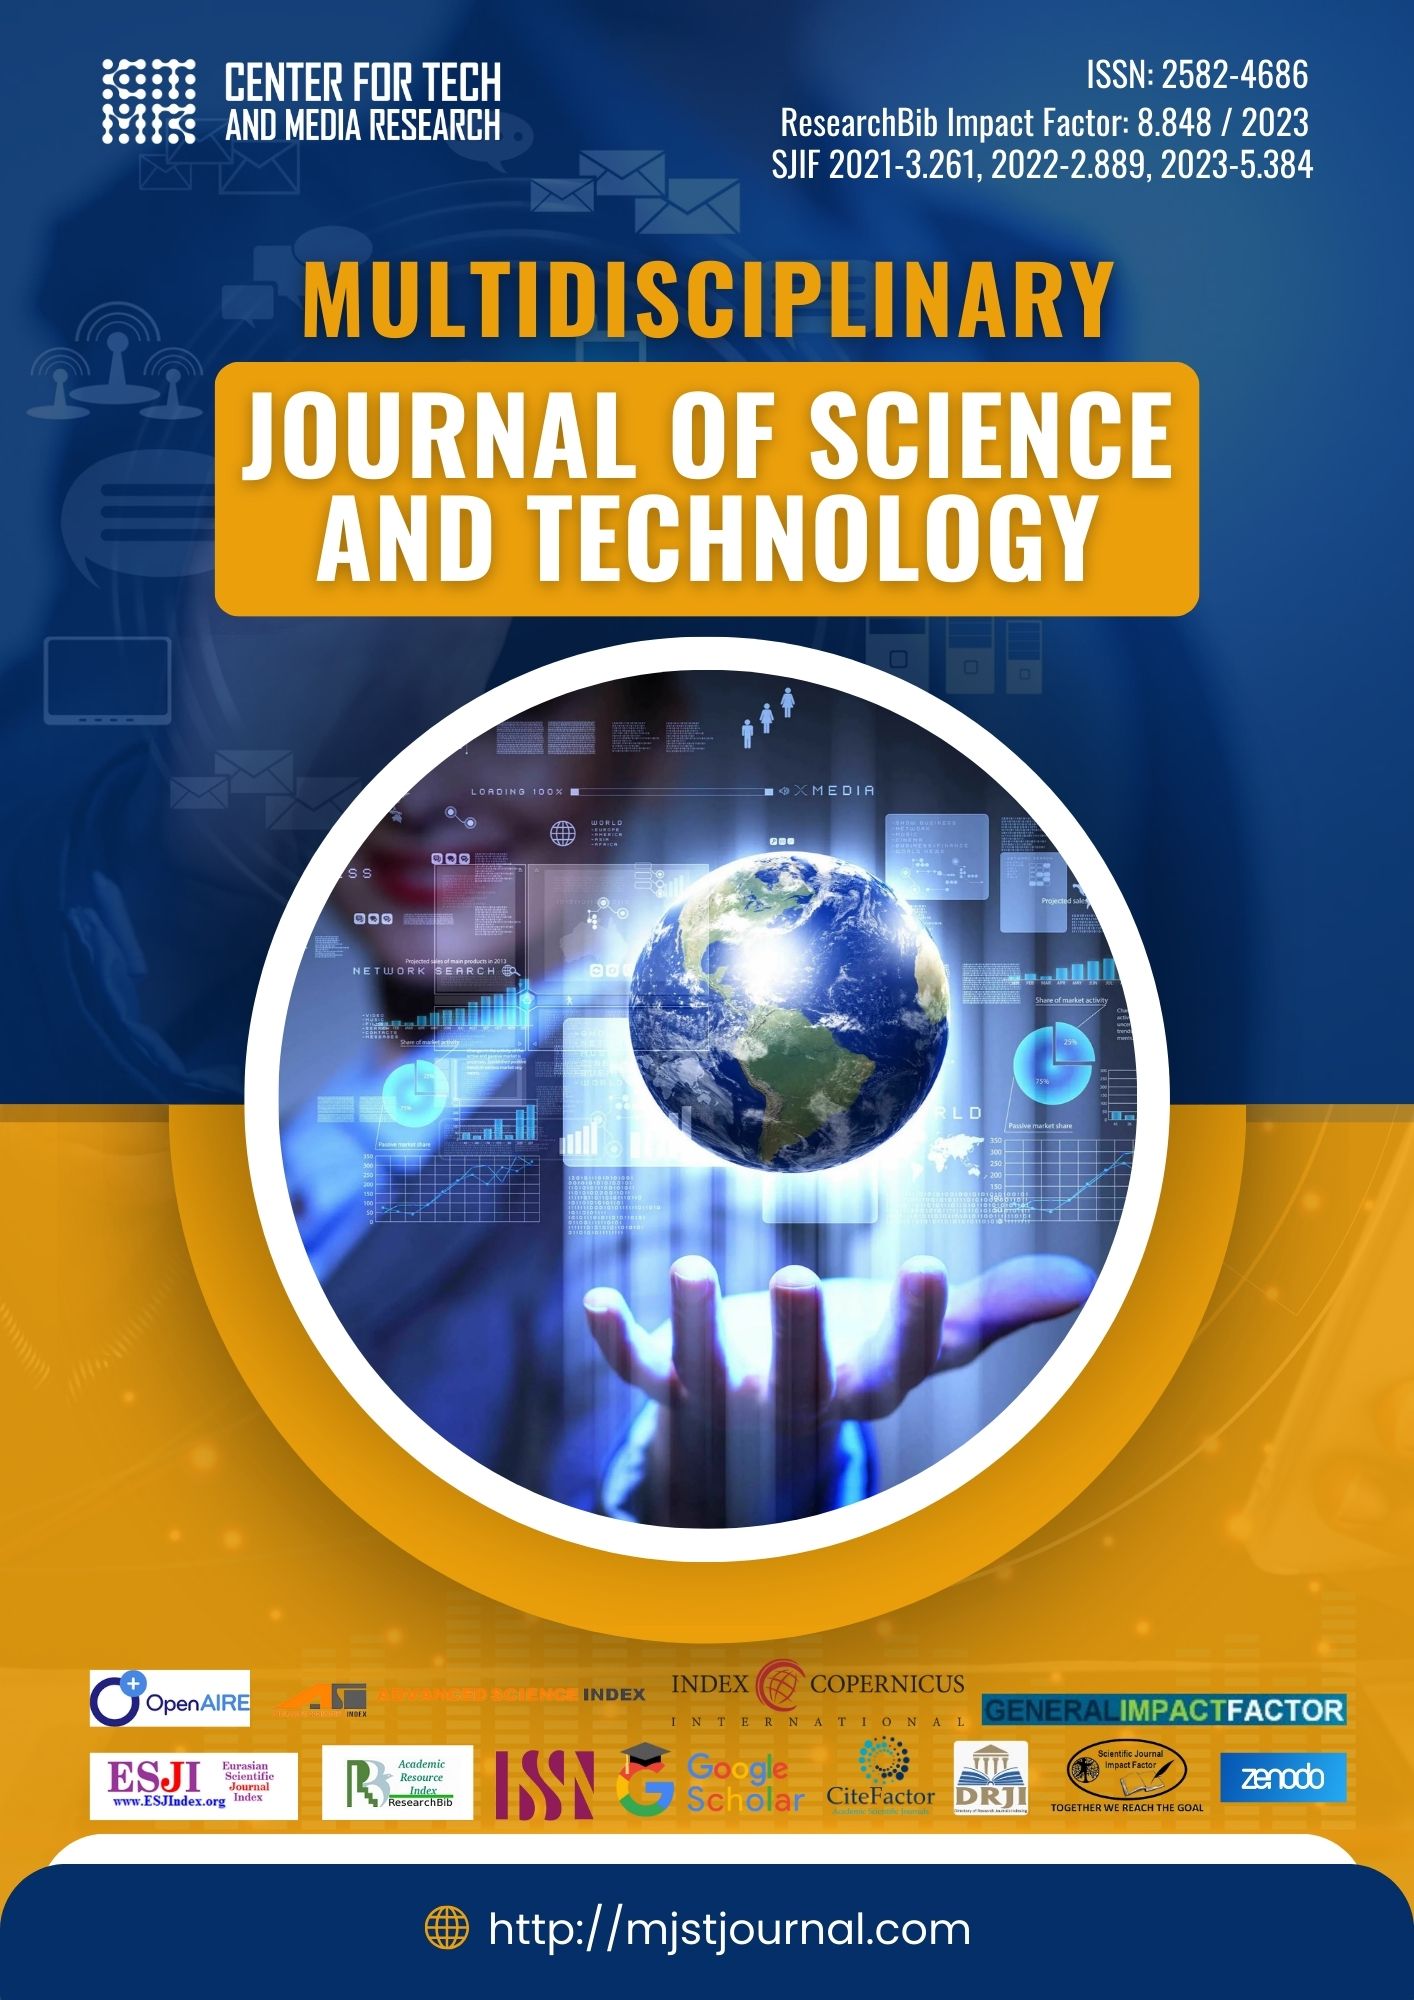                         View Vol. 3 No. 6(INTERNATIONAL SCIENTIFIC RESEARCHER) (2023): Multidisciplinary Journal of Science and Technology
                    